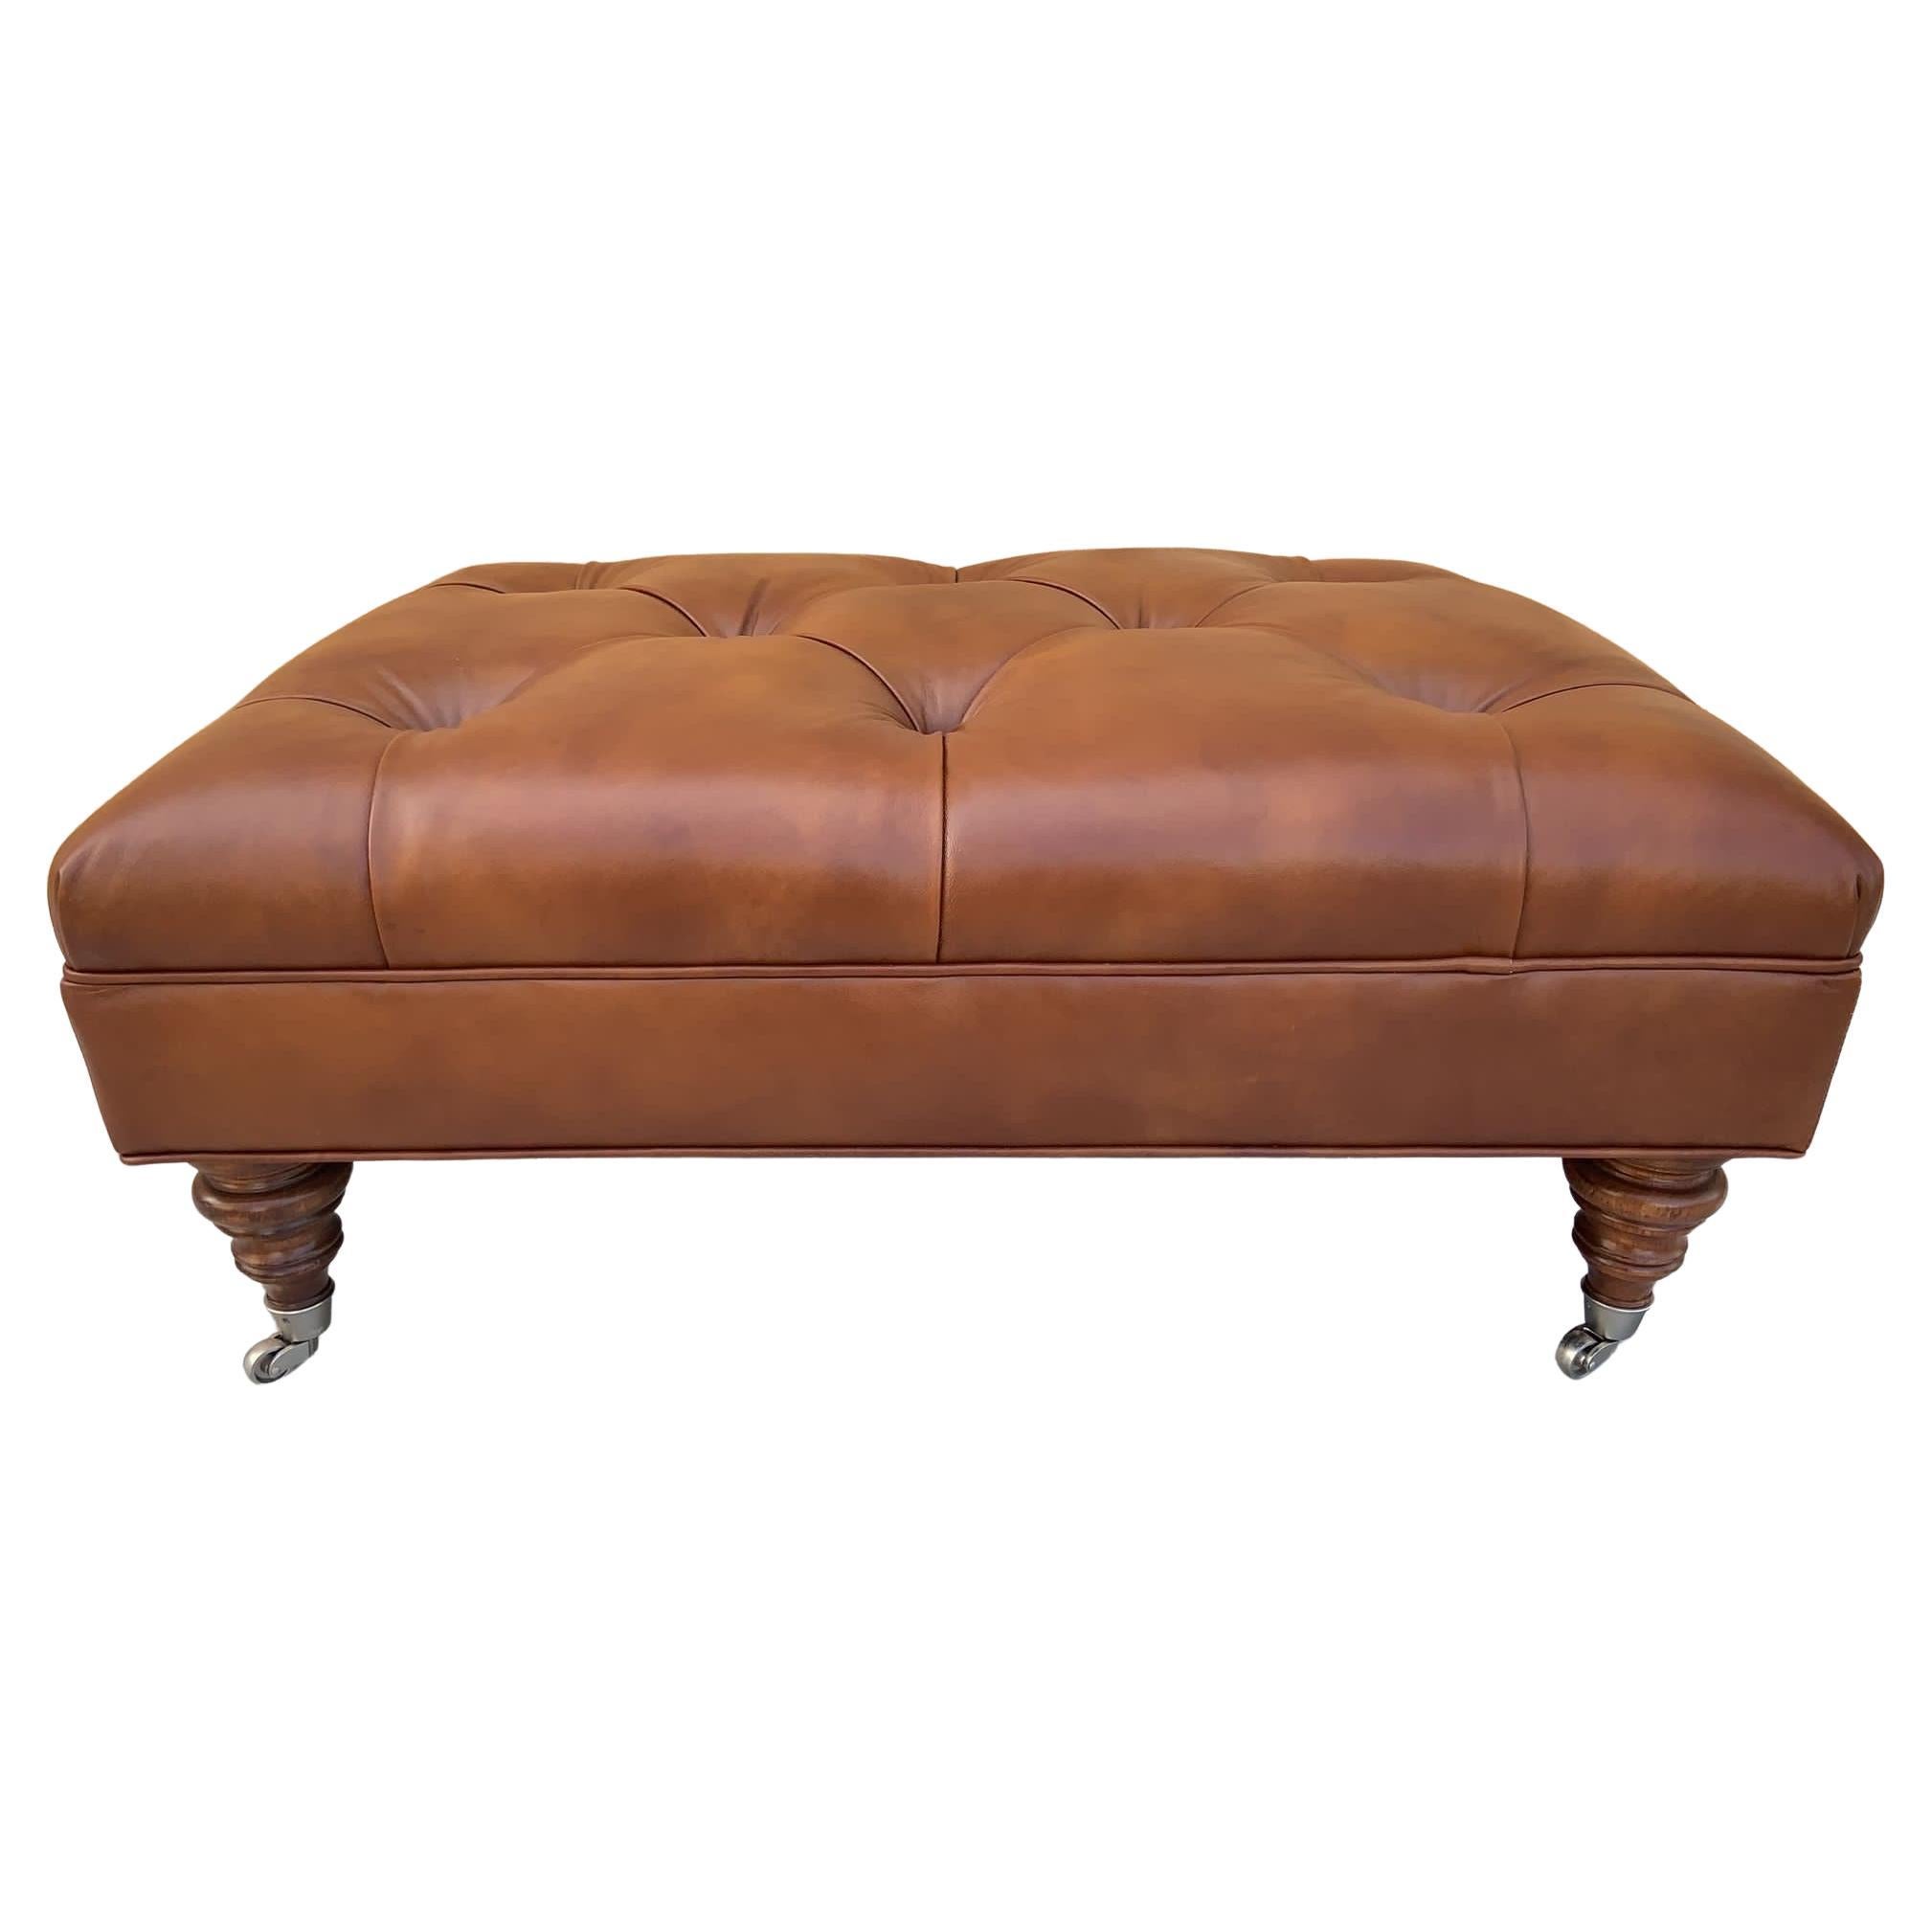 Vintage English Chesterfield Style Leather Tufted Ottoman For Sale